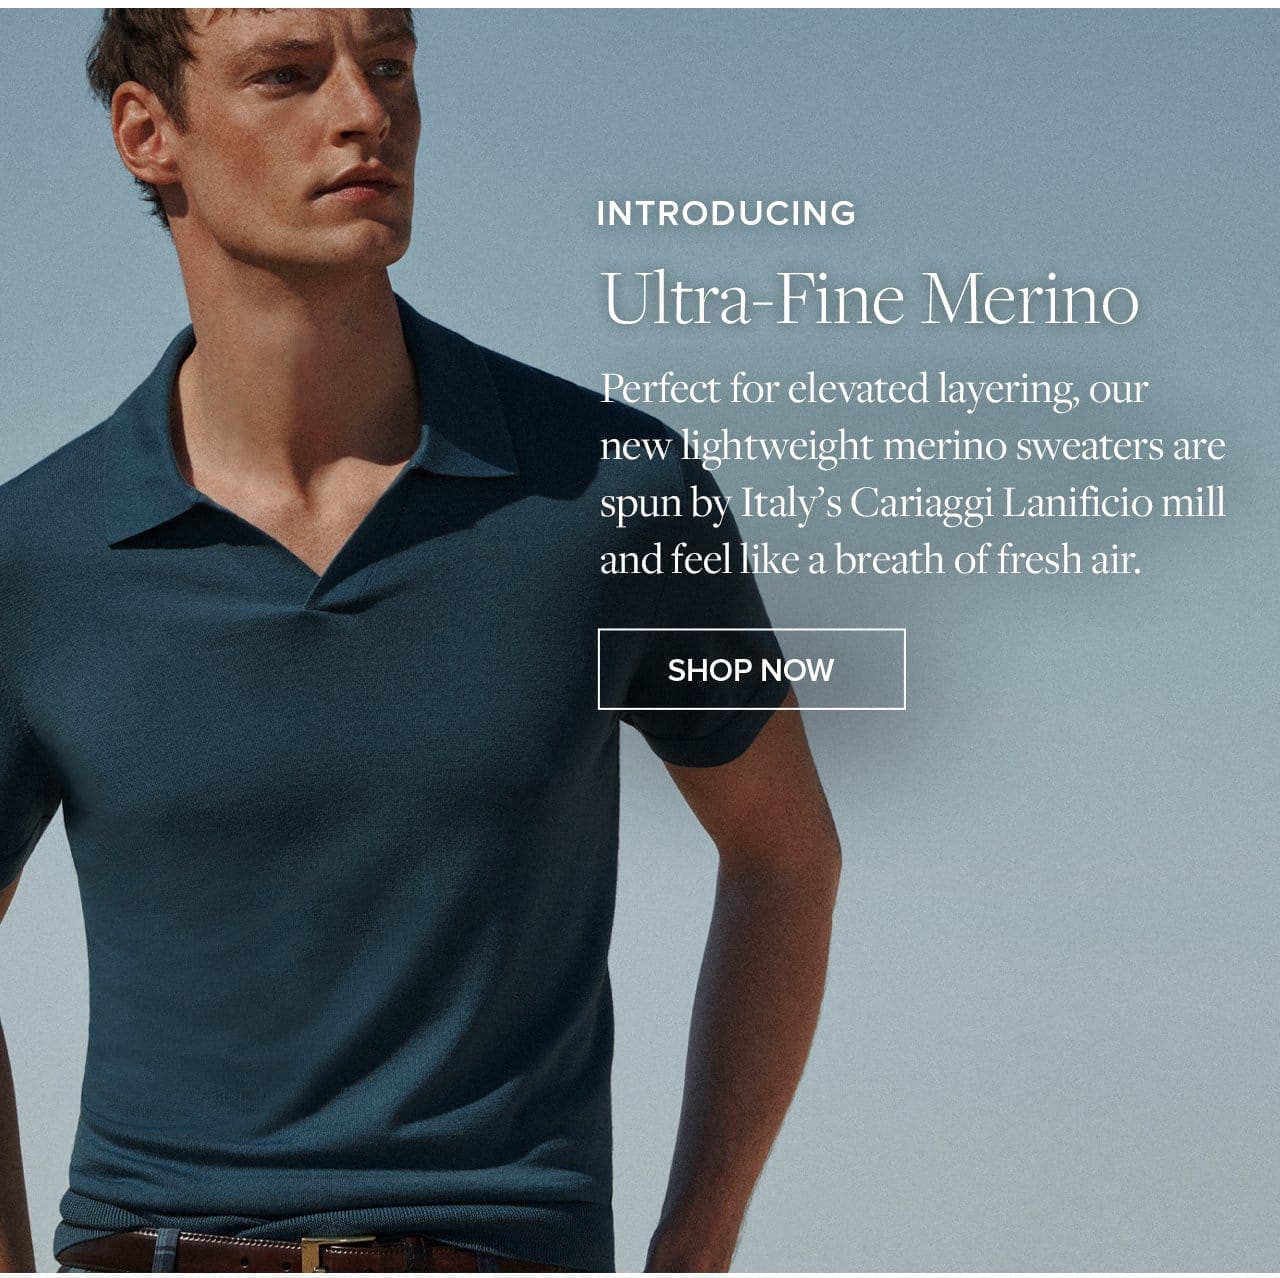 Introducing Ultra-Fine Merino Perfect for elevated layering our new lightweight merino sweaters are spun by Italy's Cariaggi Lanificio mill and feel like a breath of fresh air. Shop Now